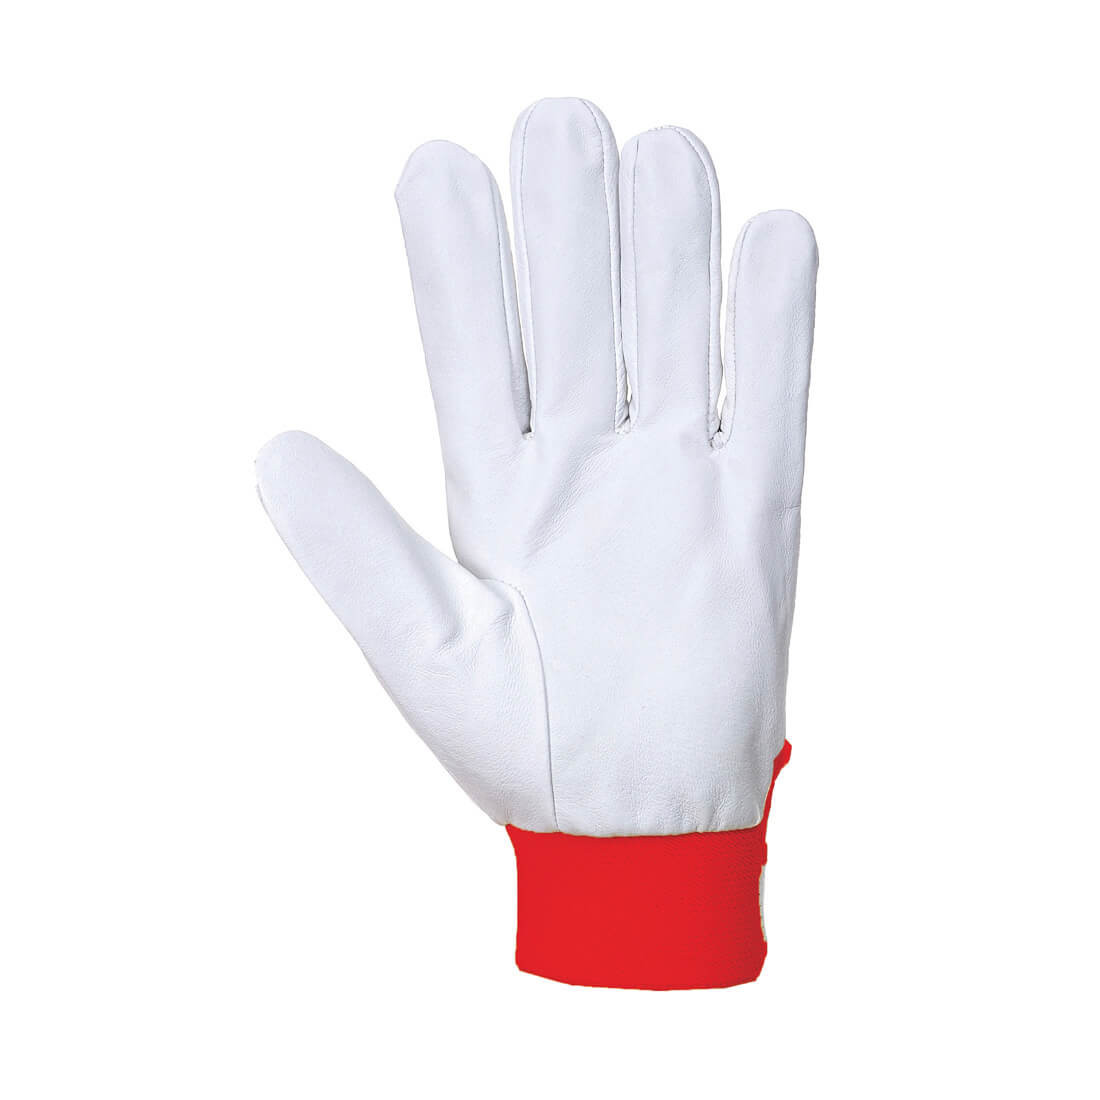 Tergsus Glove - Personal protection